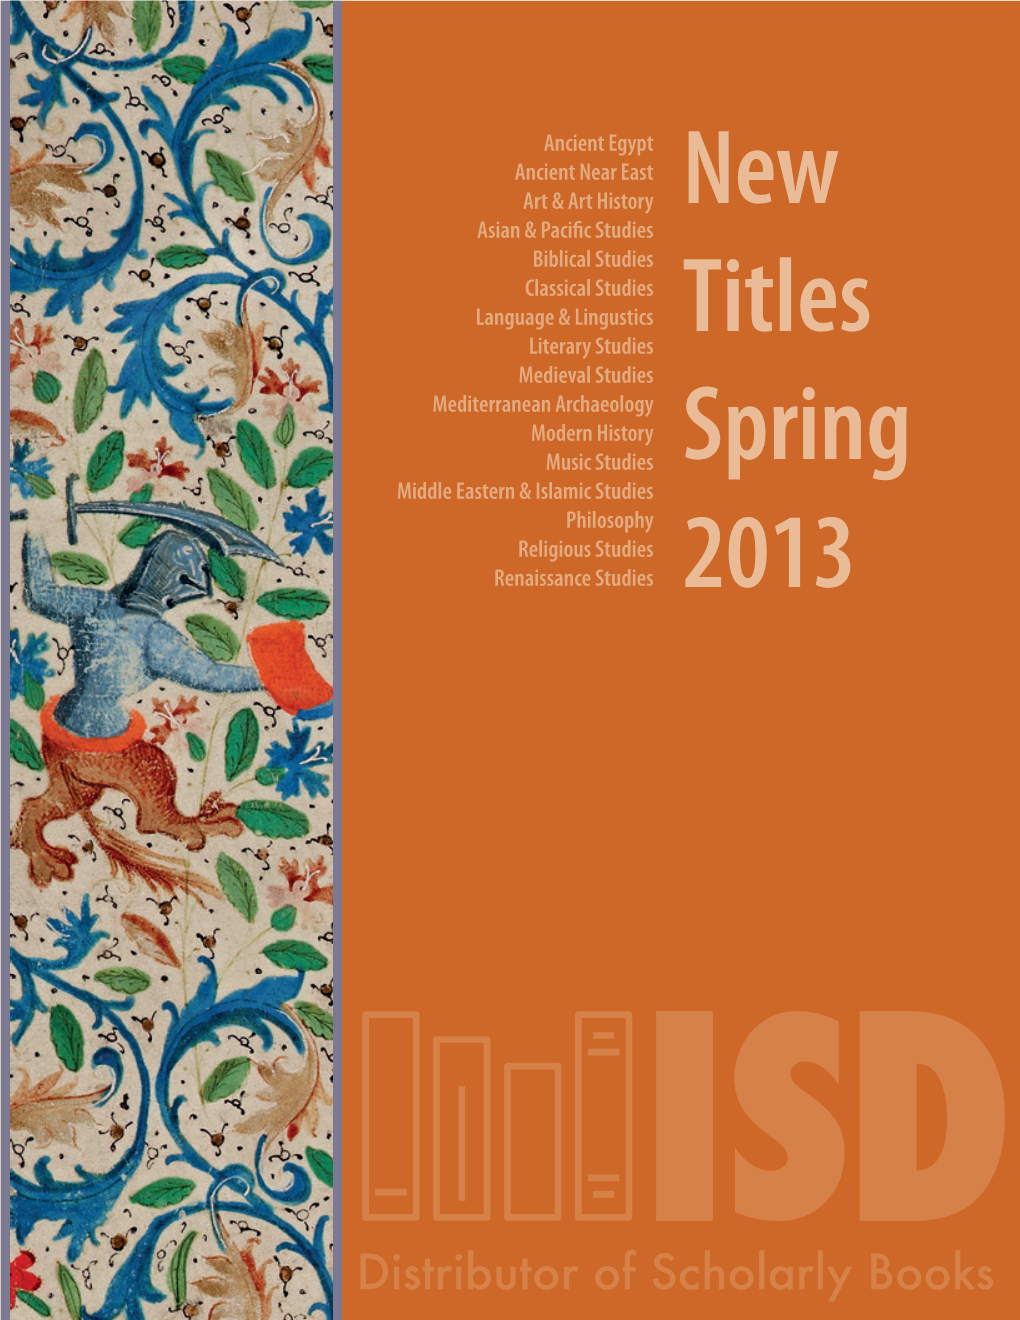 New Titles Spring 2013